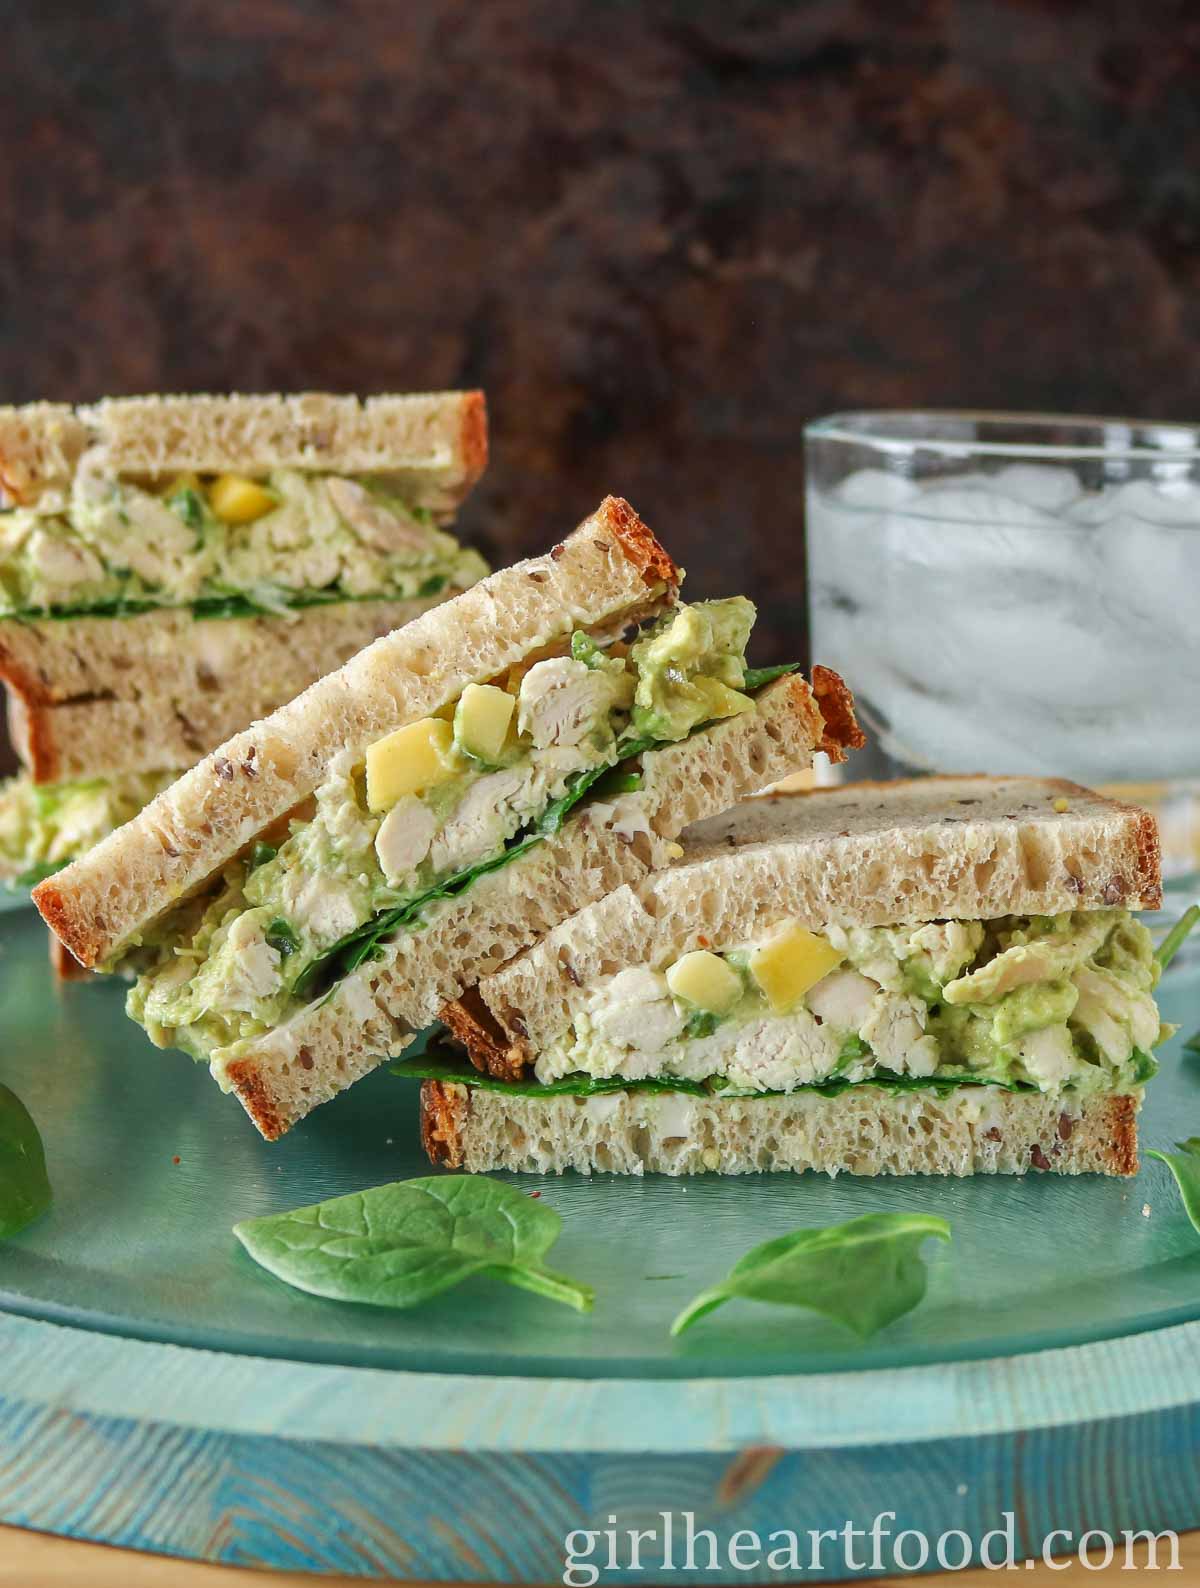 Two halves of a chicken and avocado salad sandwich, one half resting on the other half.